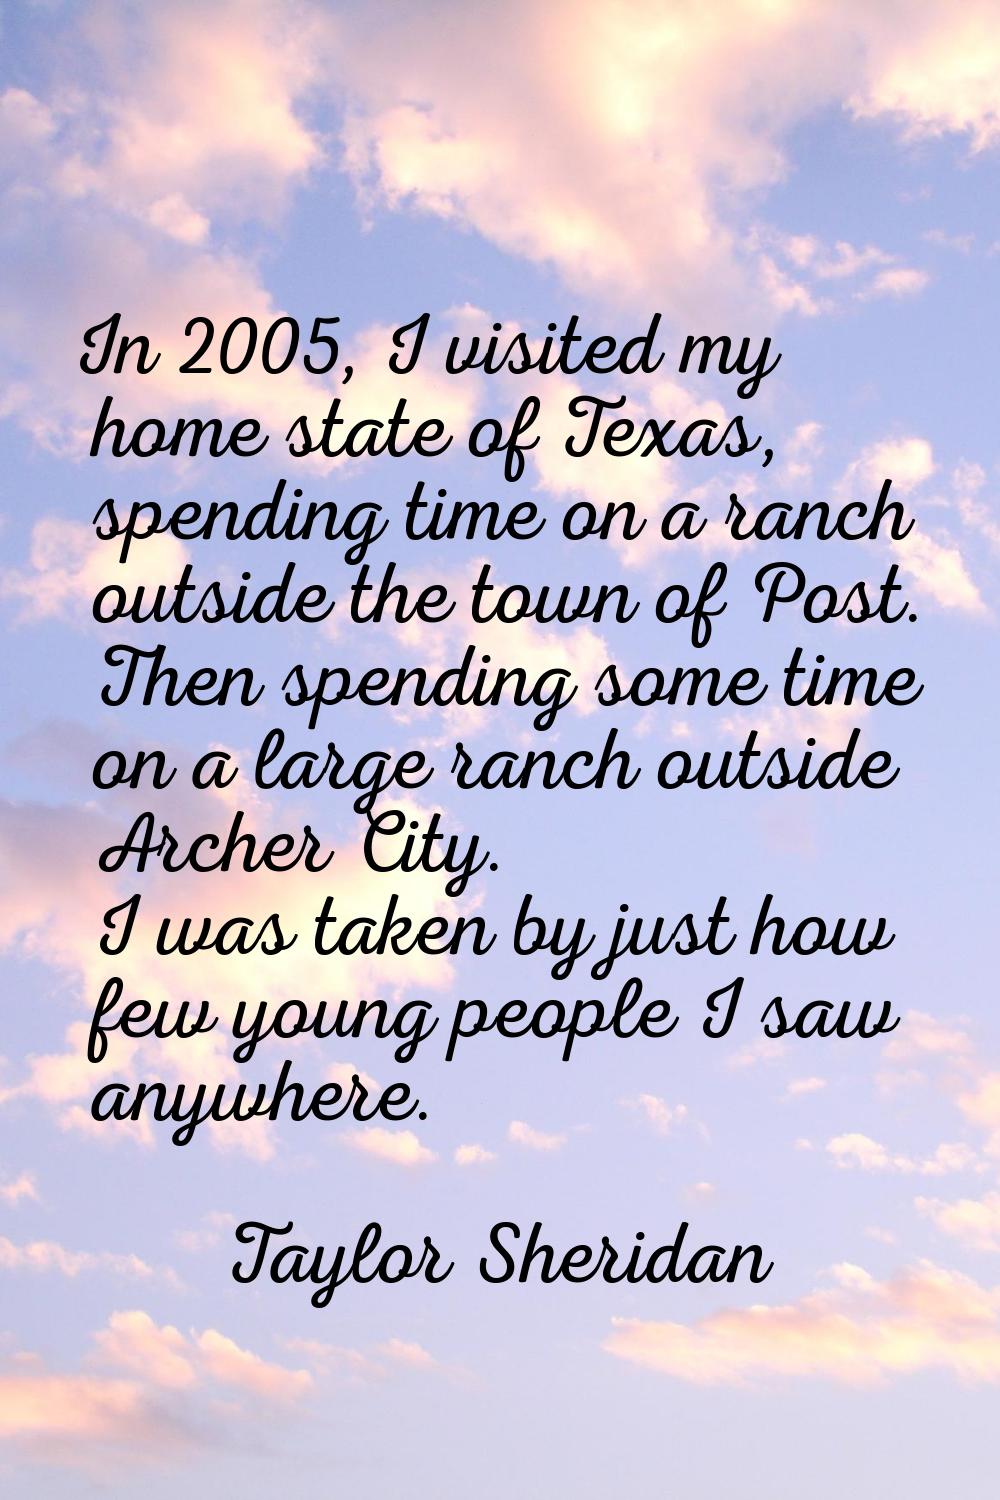 In 2005, I visited my home state of Texas, spending time on a ranch outside the town of Post. Then 